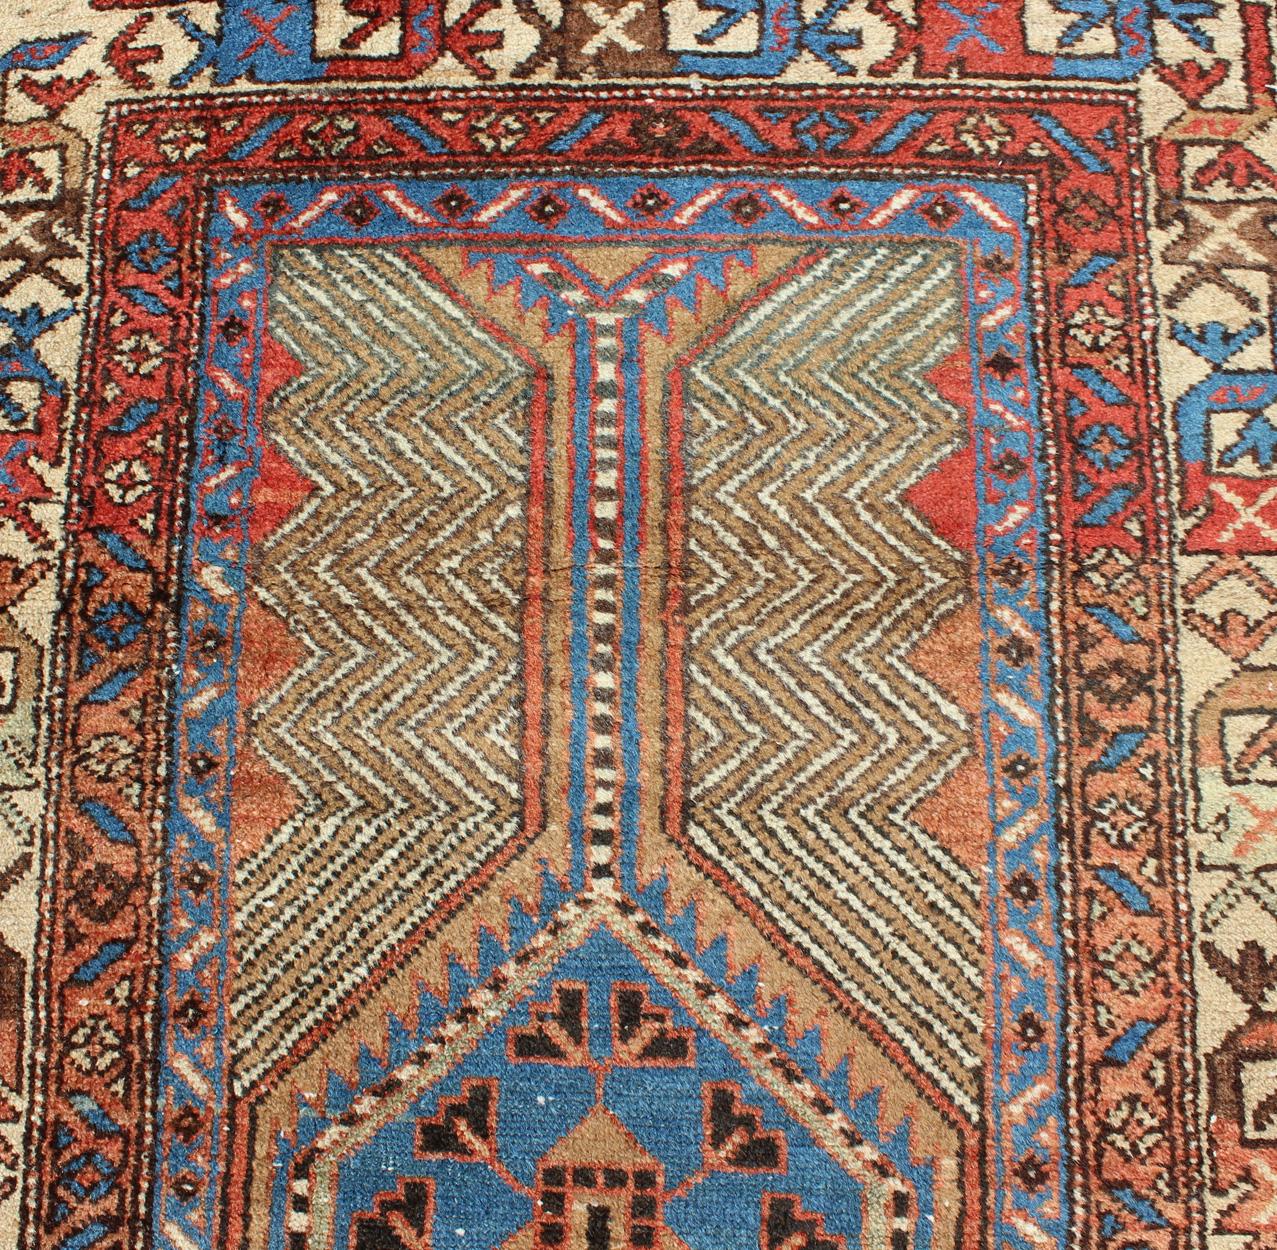 Early 20th Century Colorful Antique Persian Serab Gallery Rug with Unique Geometric Design